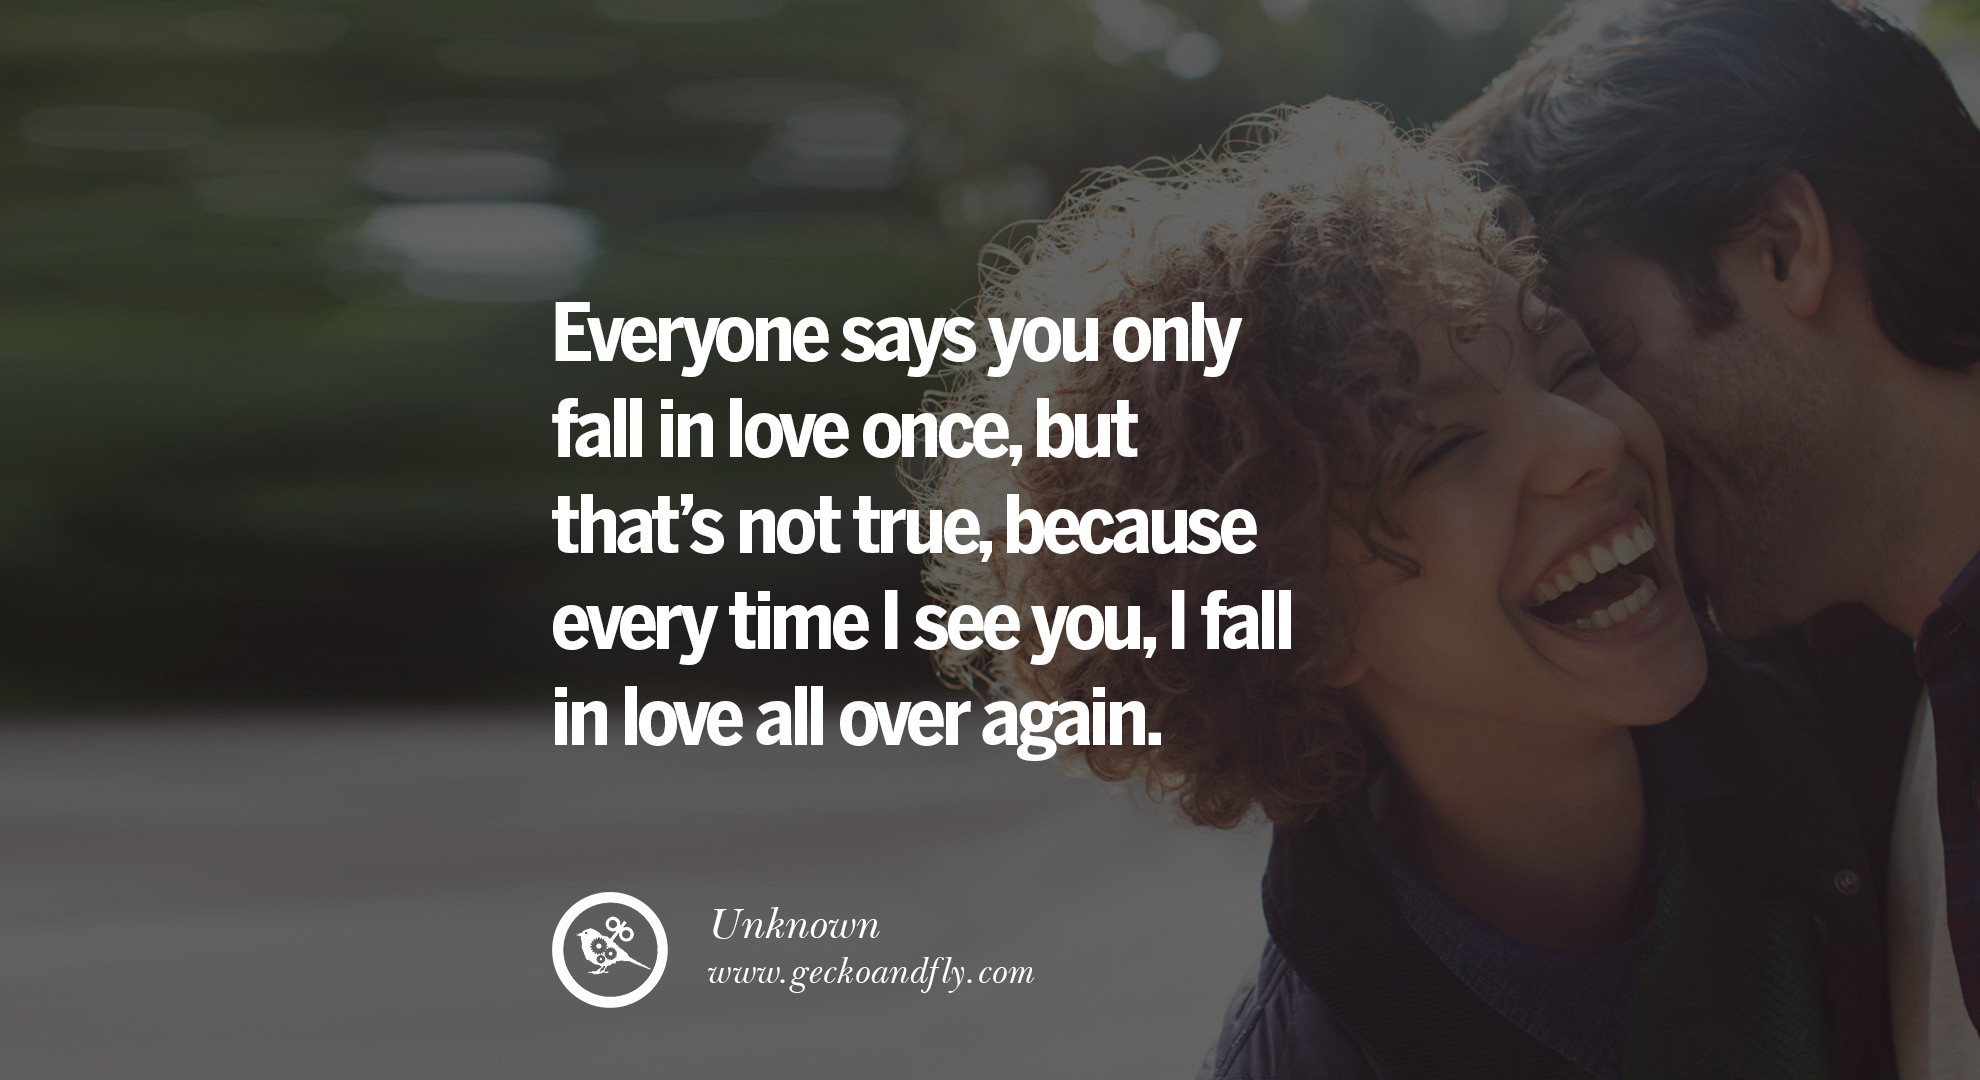 Quote Romantic
 40 Romantic Quotes about Love Life Marriage and Relationships